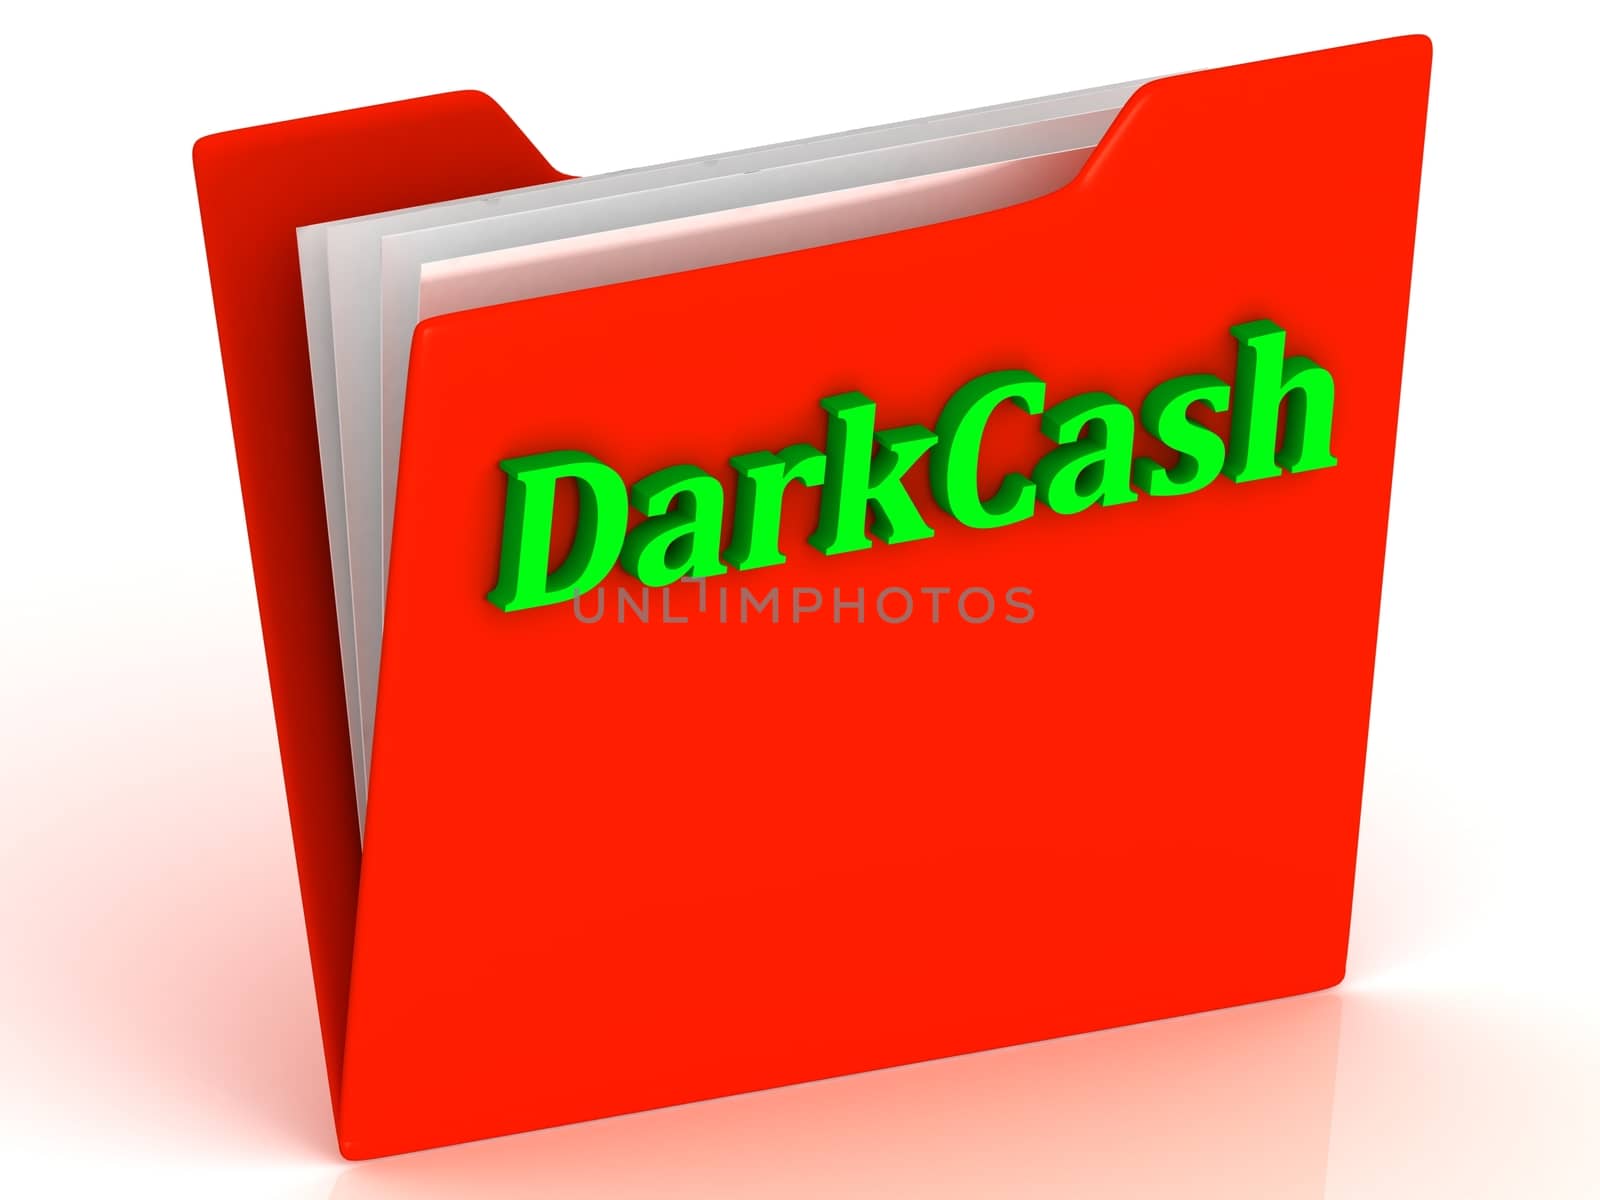 DarkCash- bright green letters on red paperwork folder by GreenMost